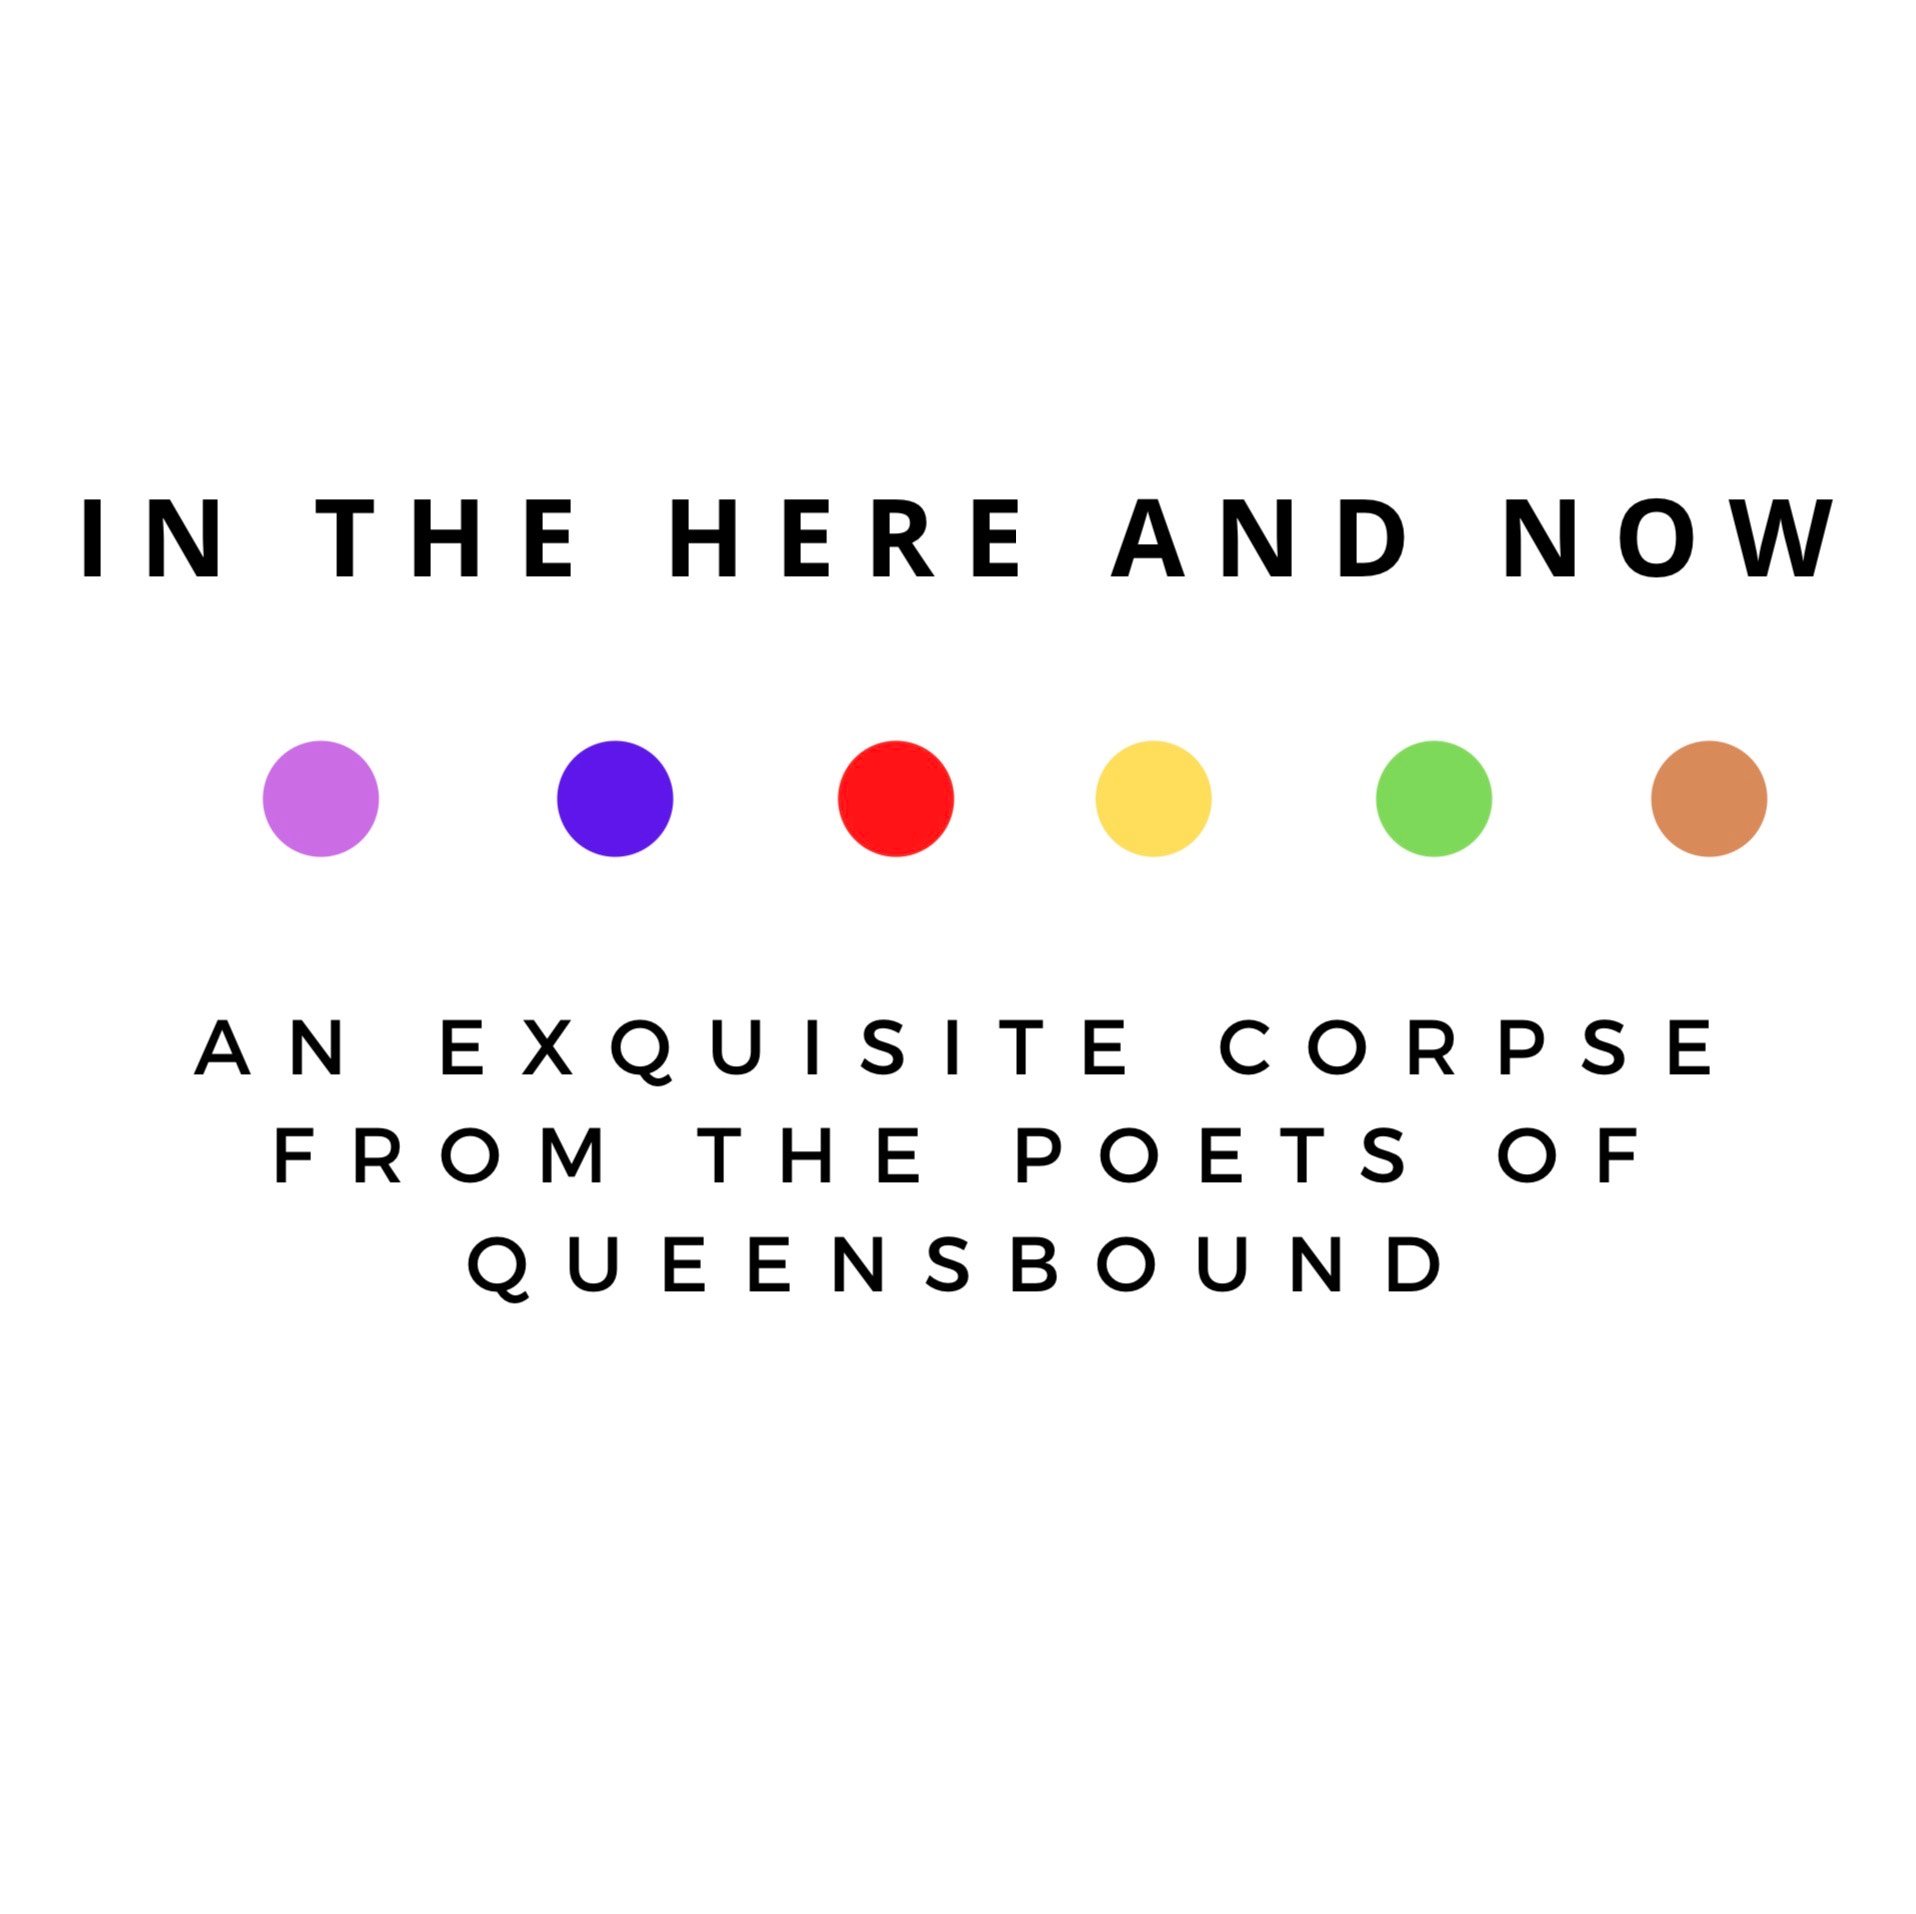 queensbound_in_the_here_and_now_title_card_1.jpg